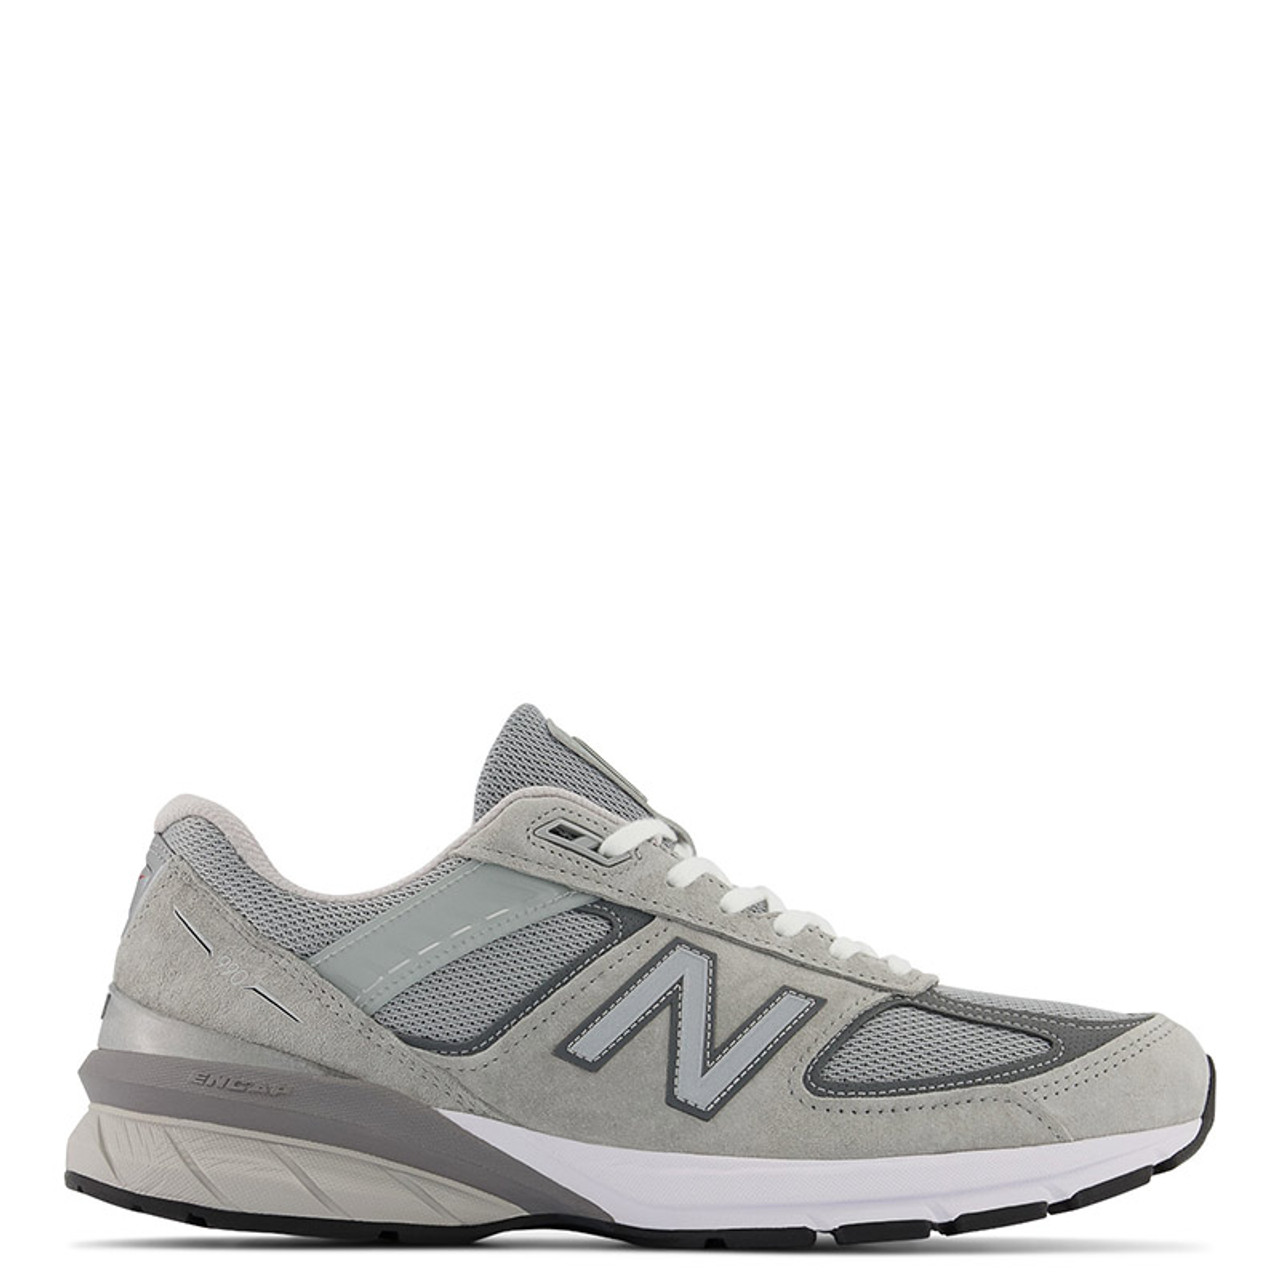 New Balance MADE in USA 990v5 Men's Grey Running Shoes - Family Footwear  Center